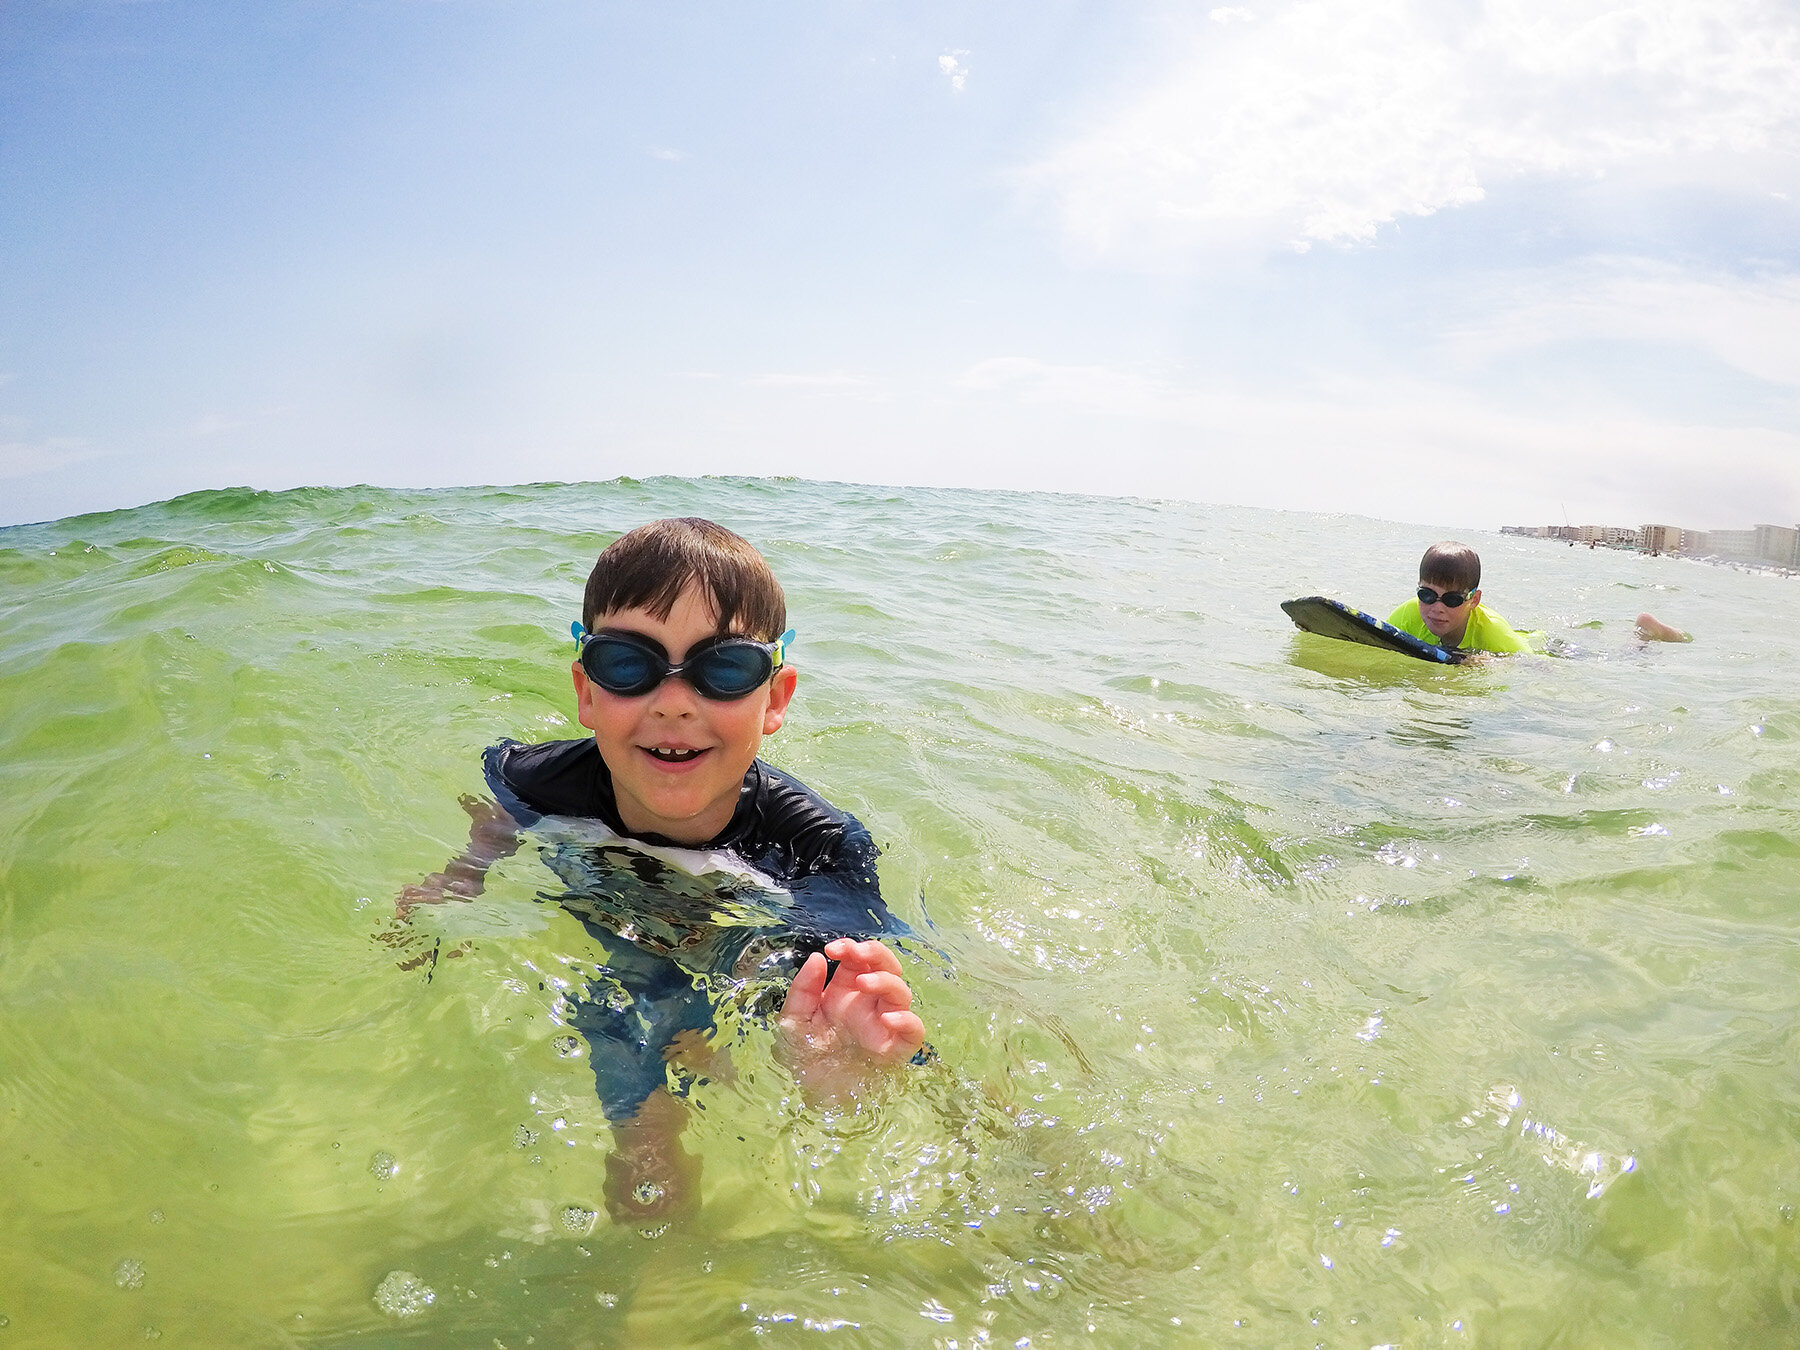 Louisville Photographer | Family Vacation Go Pro Photos | Julie Brock Photography | Boys having fun swimming in water.jpg